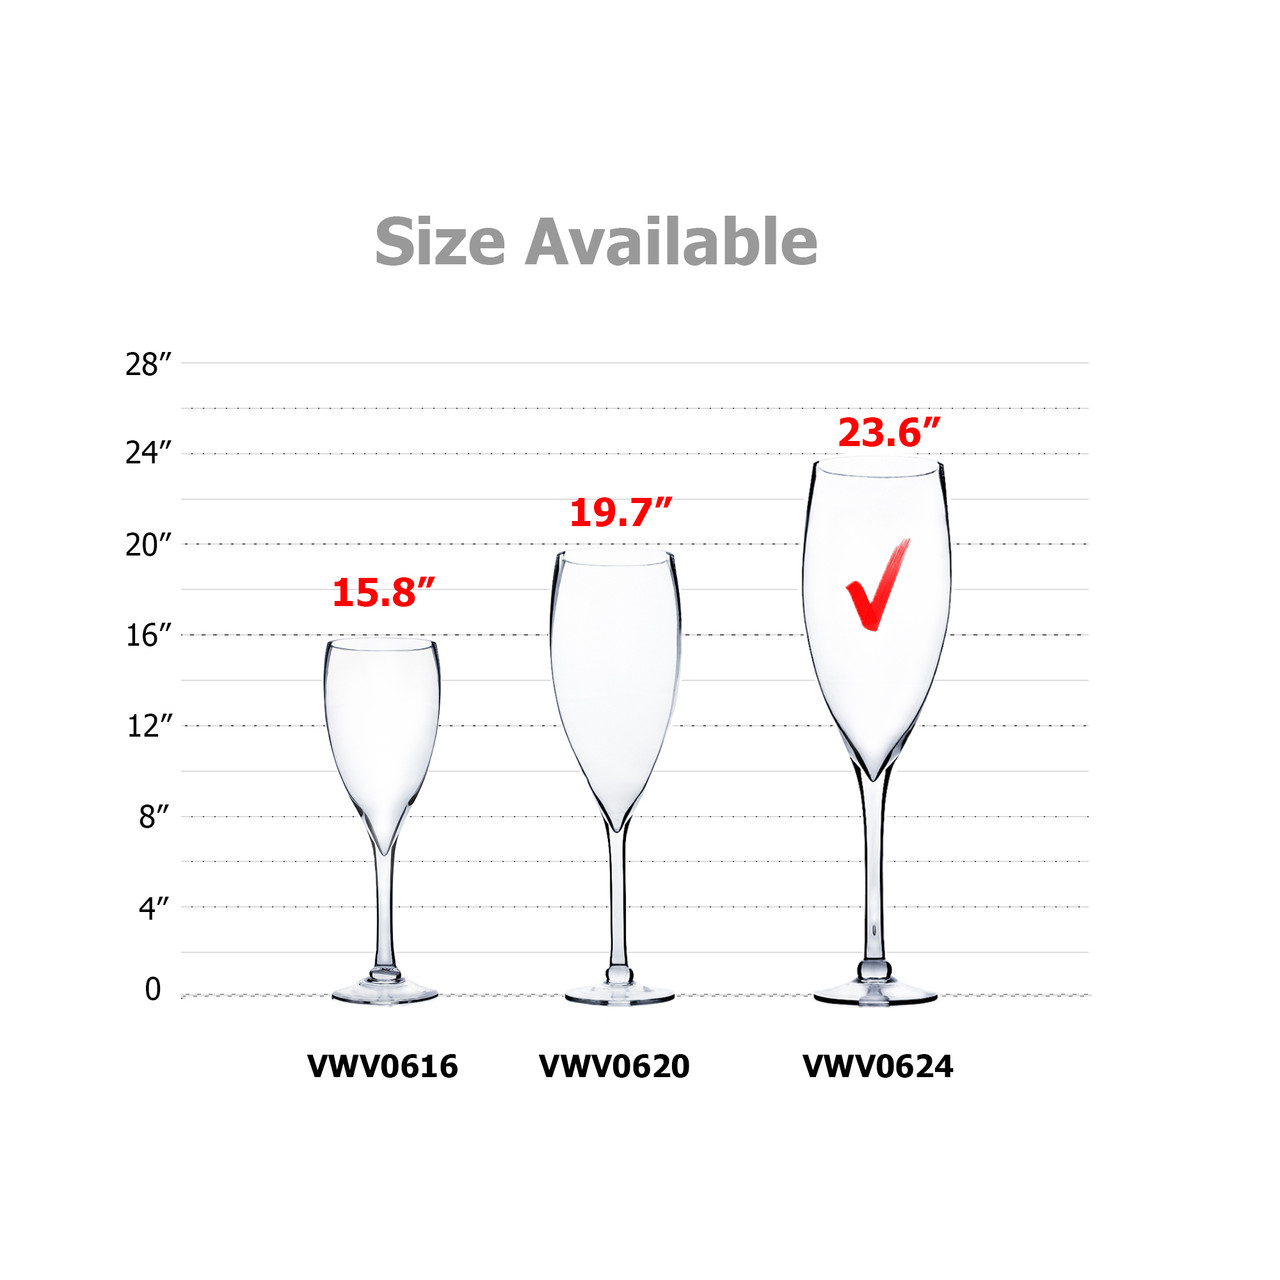 XL Oversized Wine Glass Dimensions & Drawings